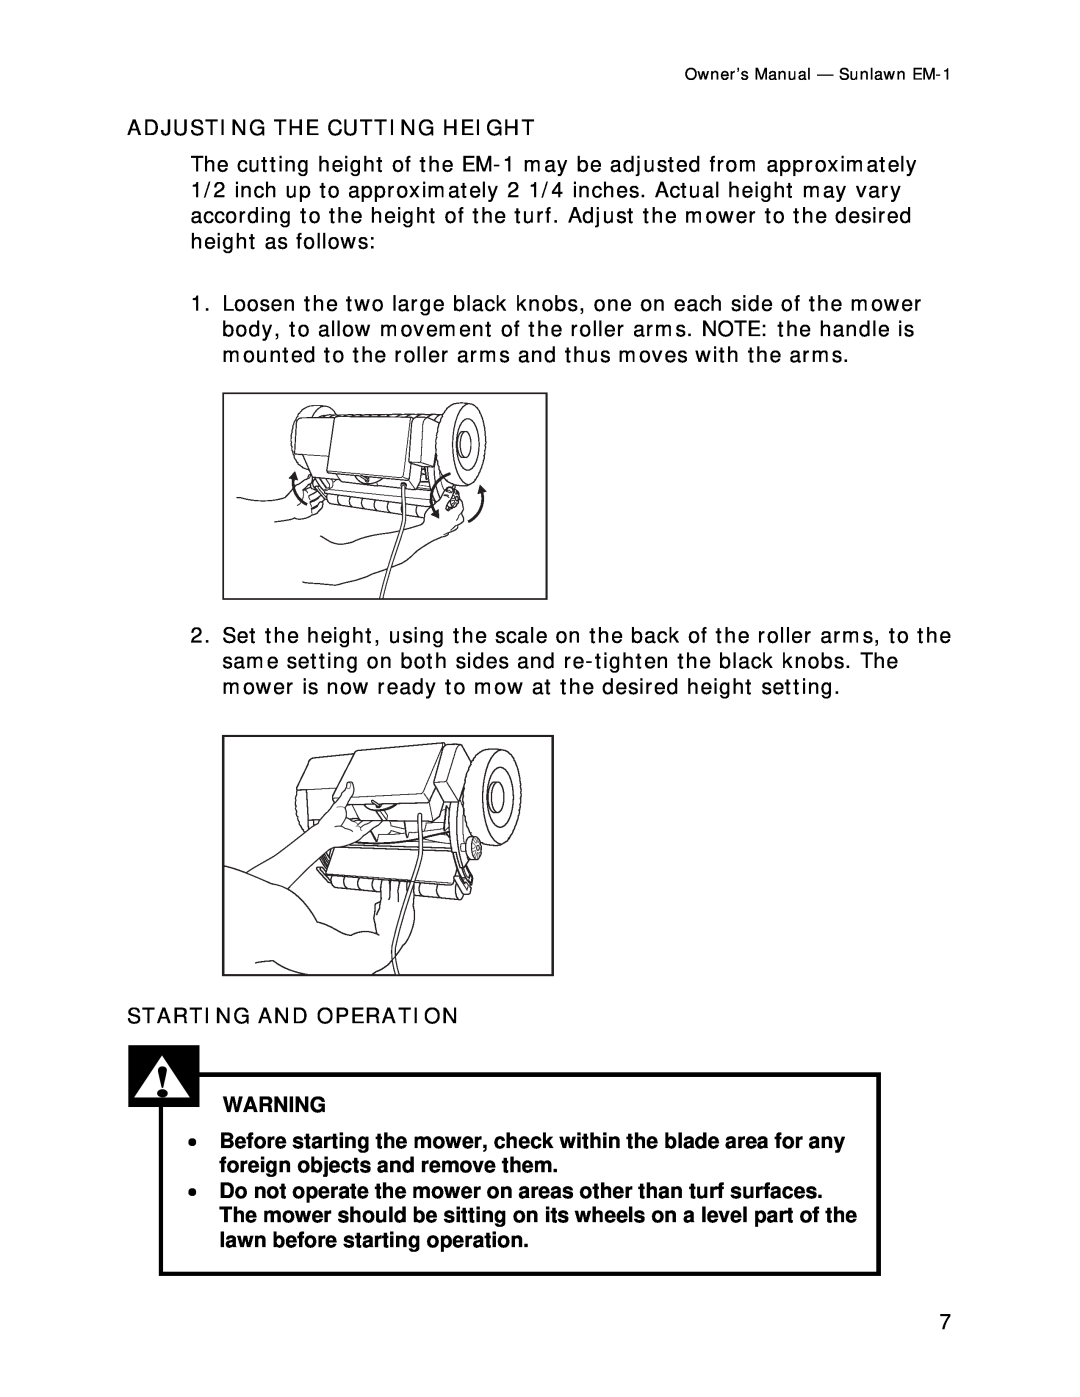 Sun Lawn EM-1 owner manual Adjusting The Cutting Height, Starting And Operation 